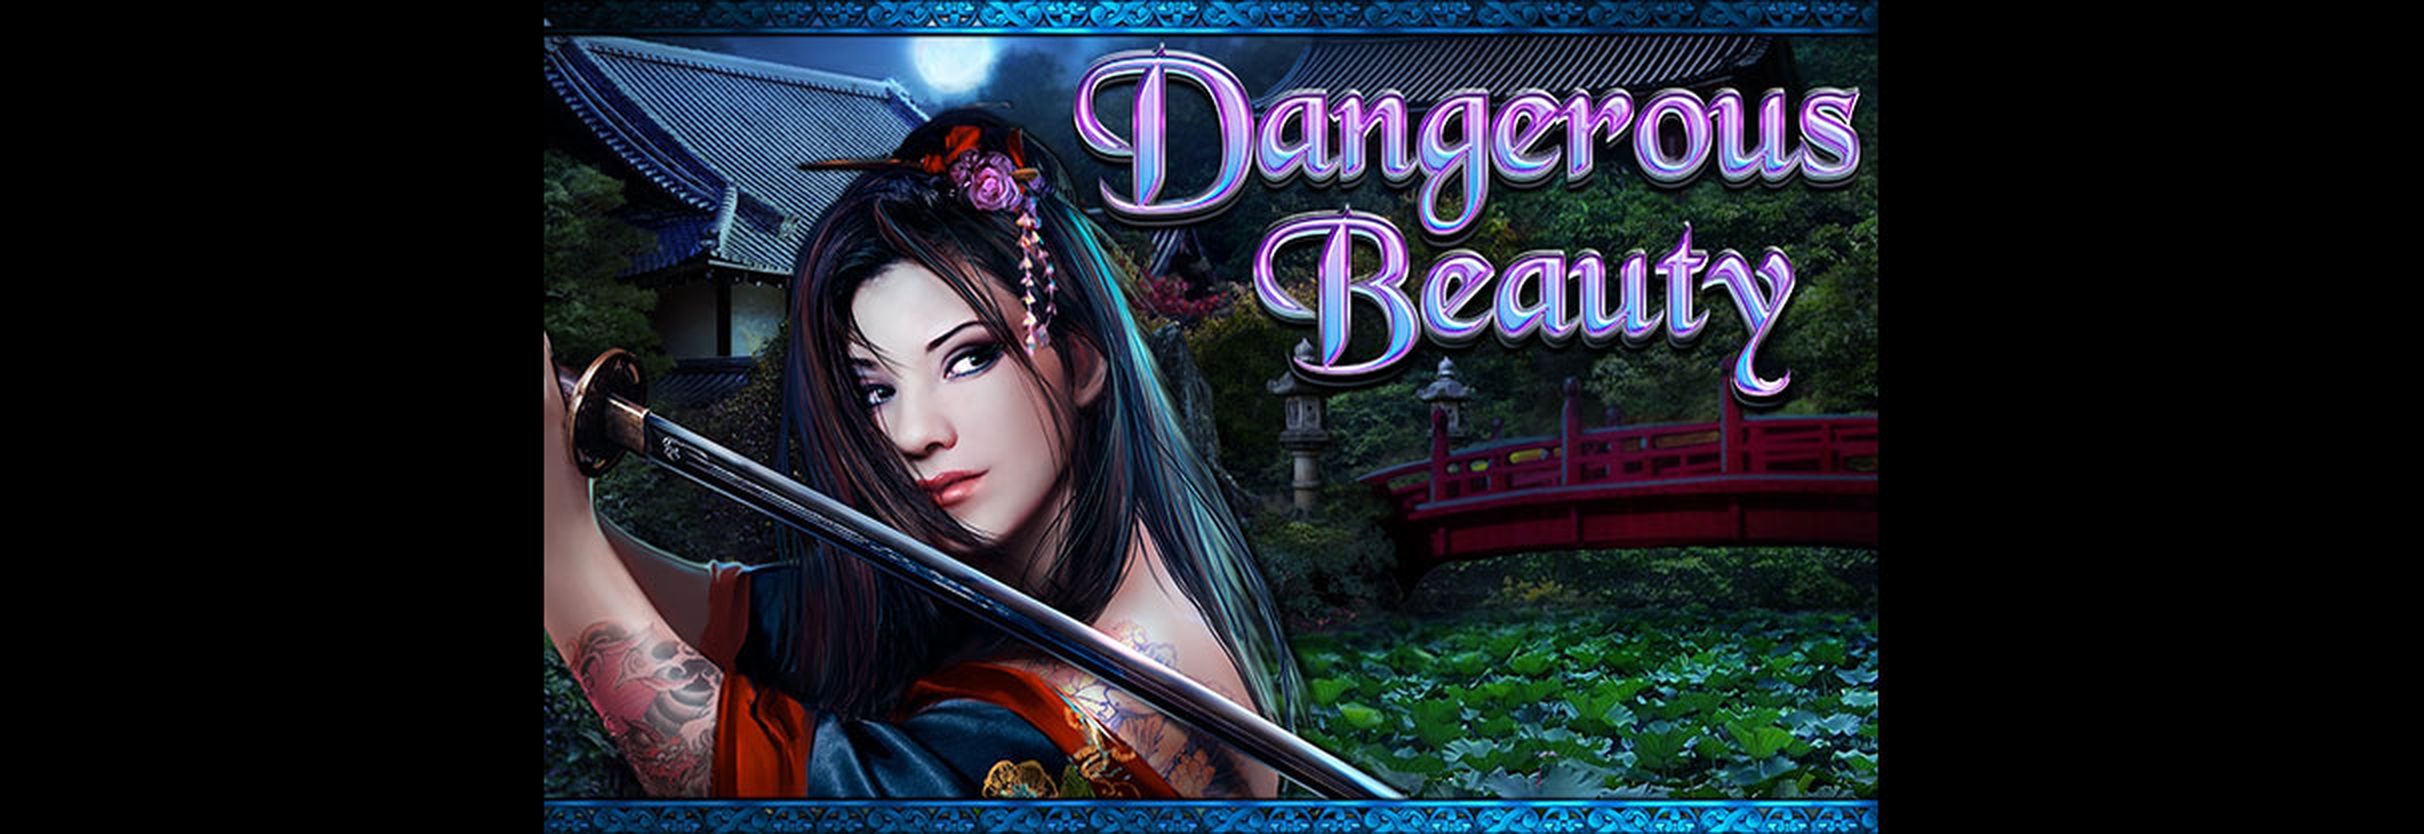 The Dangerous Beauty Online Slot Demo Game by High 5 Games